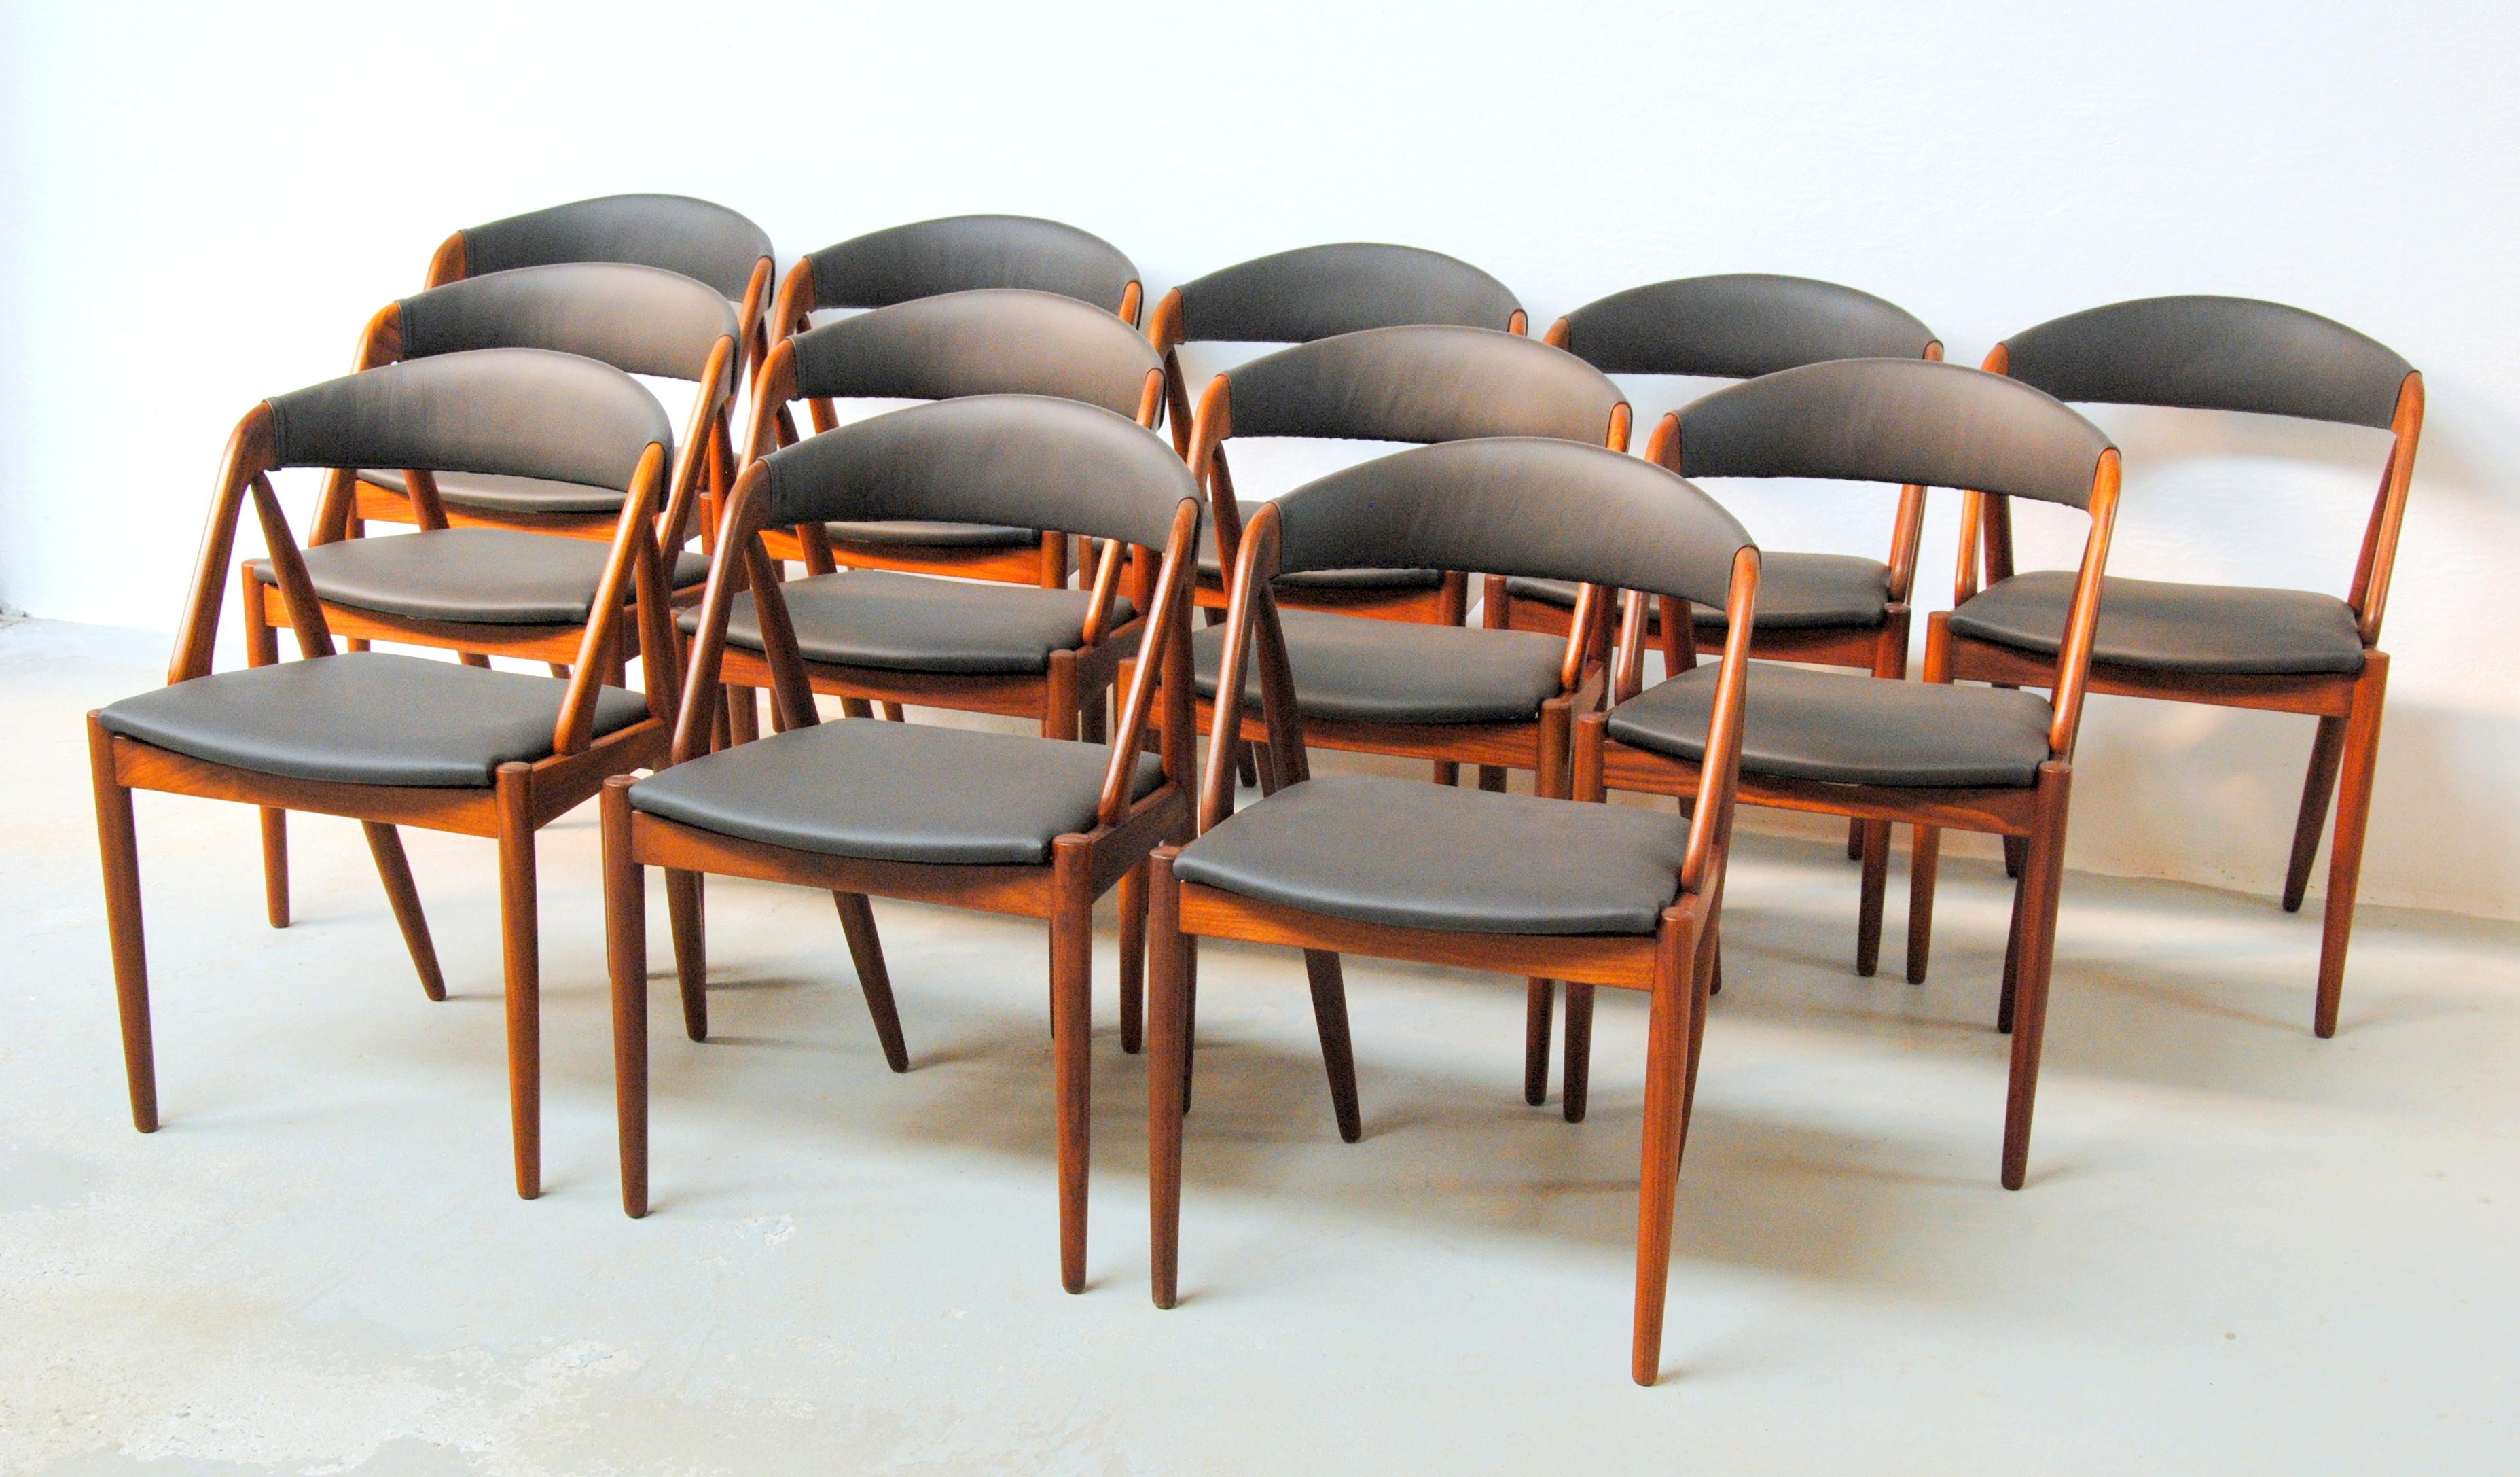 Kai Kristiansen set of twelve fully restored teak dining chairs by Schou Andersens Møbel Fabrik.

The A-frame model 31 dining chairs were designed by Kai Kristiansen in 1956 for Schou-Andersens Møbelfabrik and the A-frame chair is one of the most